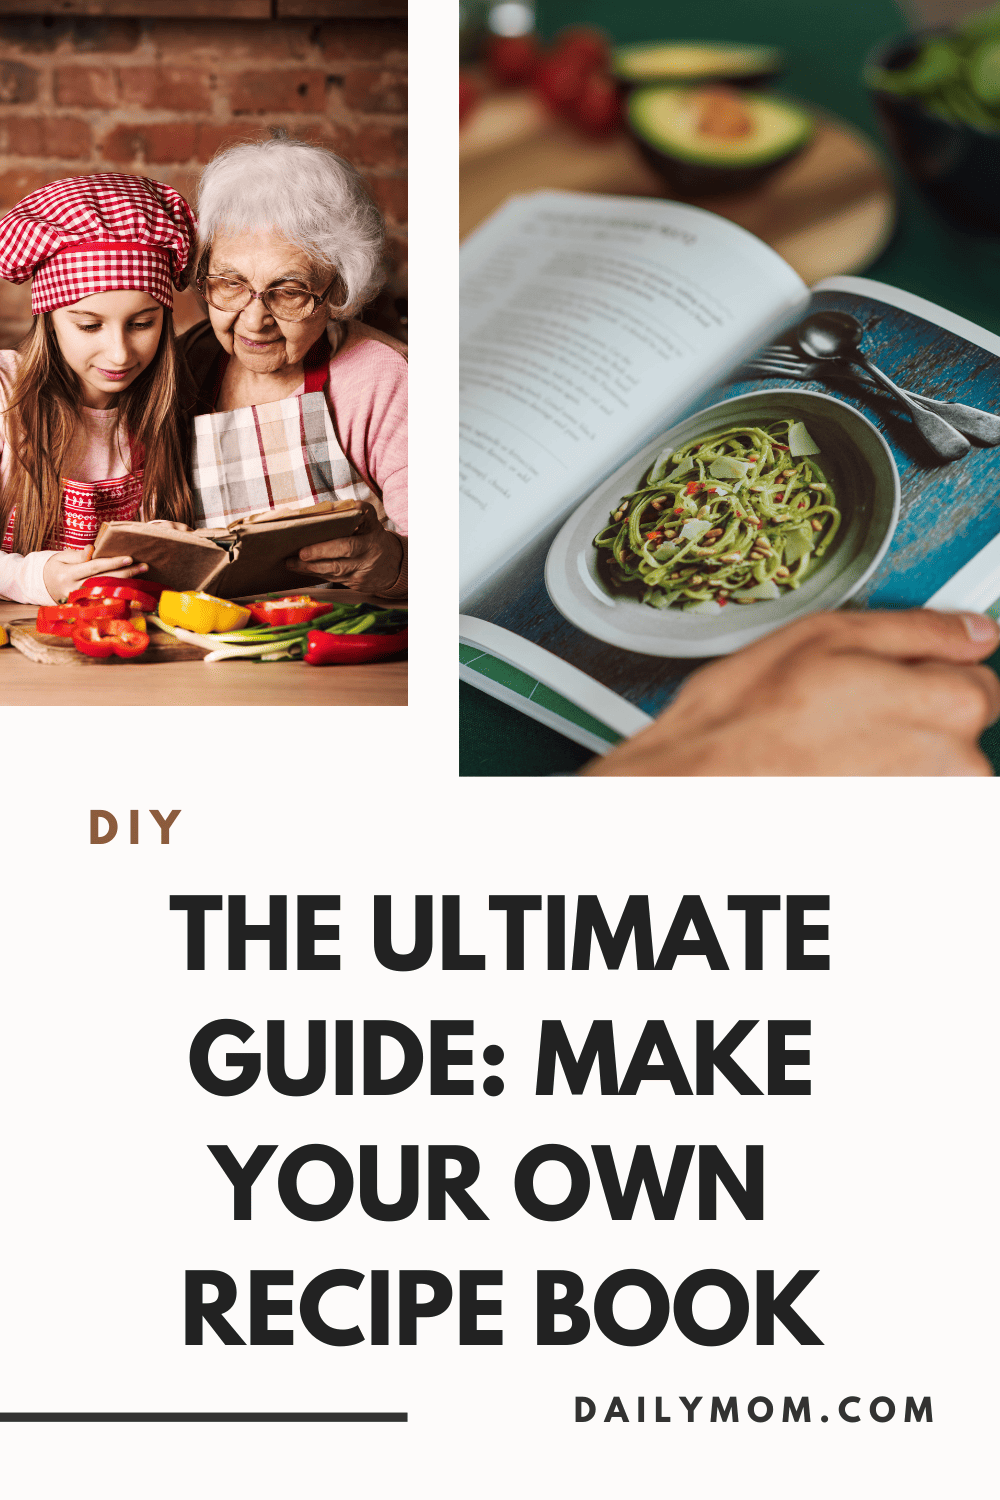 Make your own family recipe book